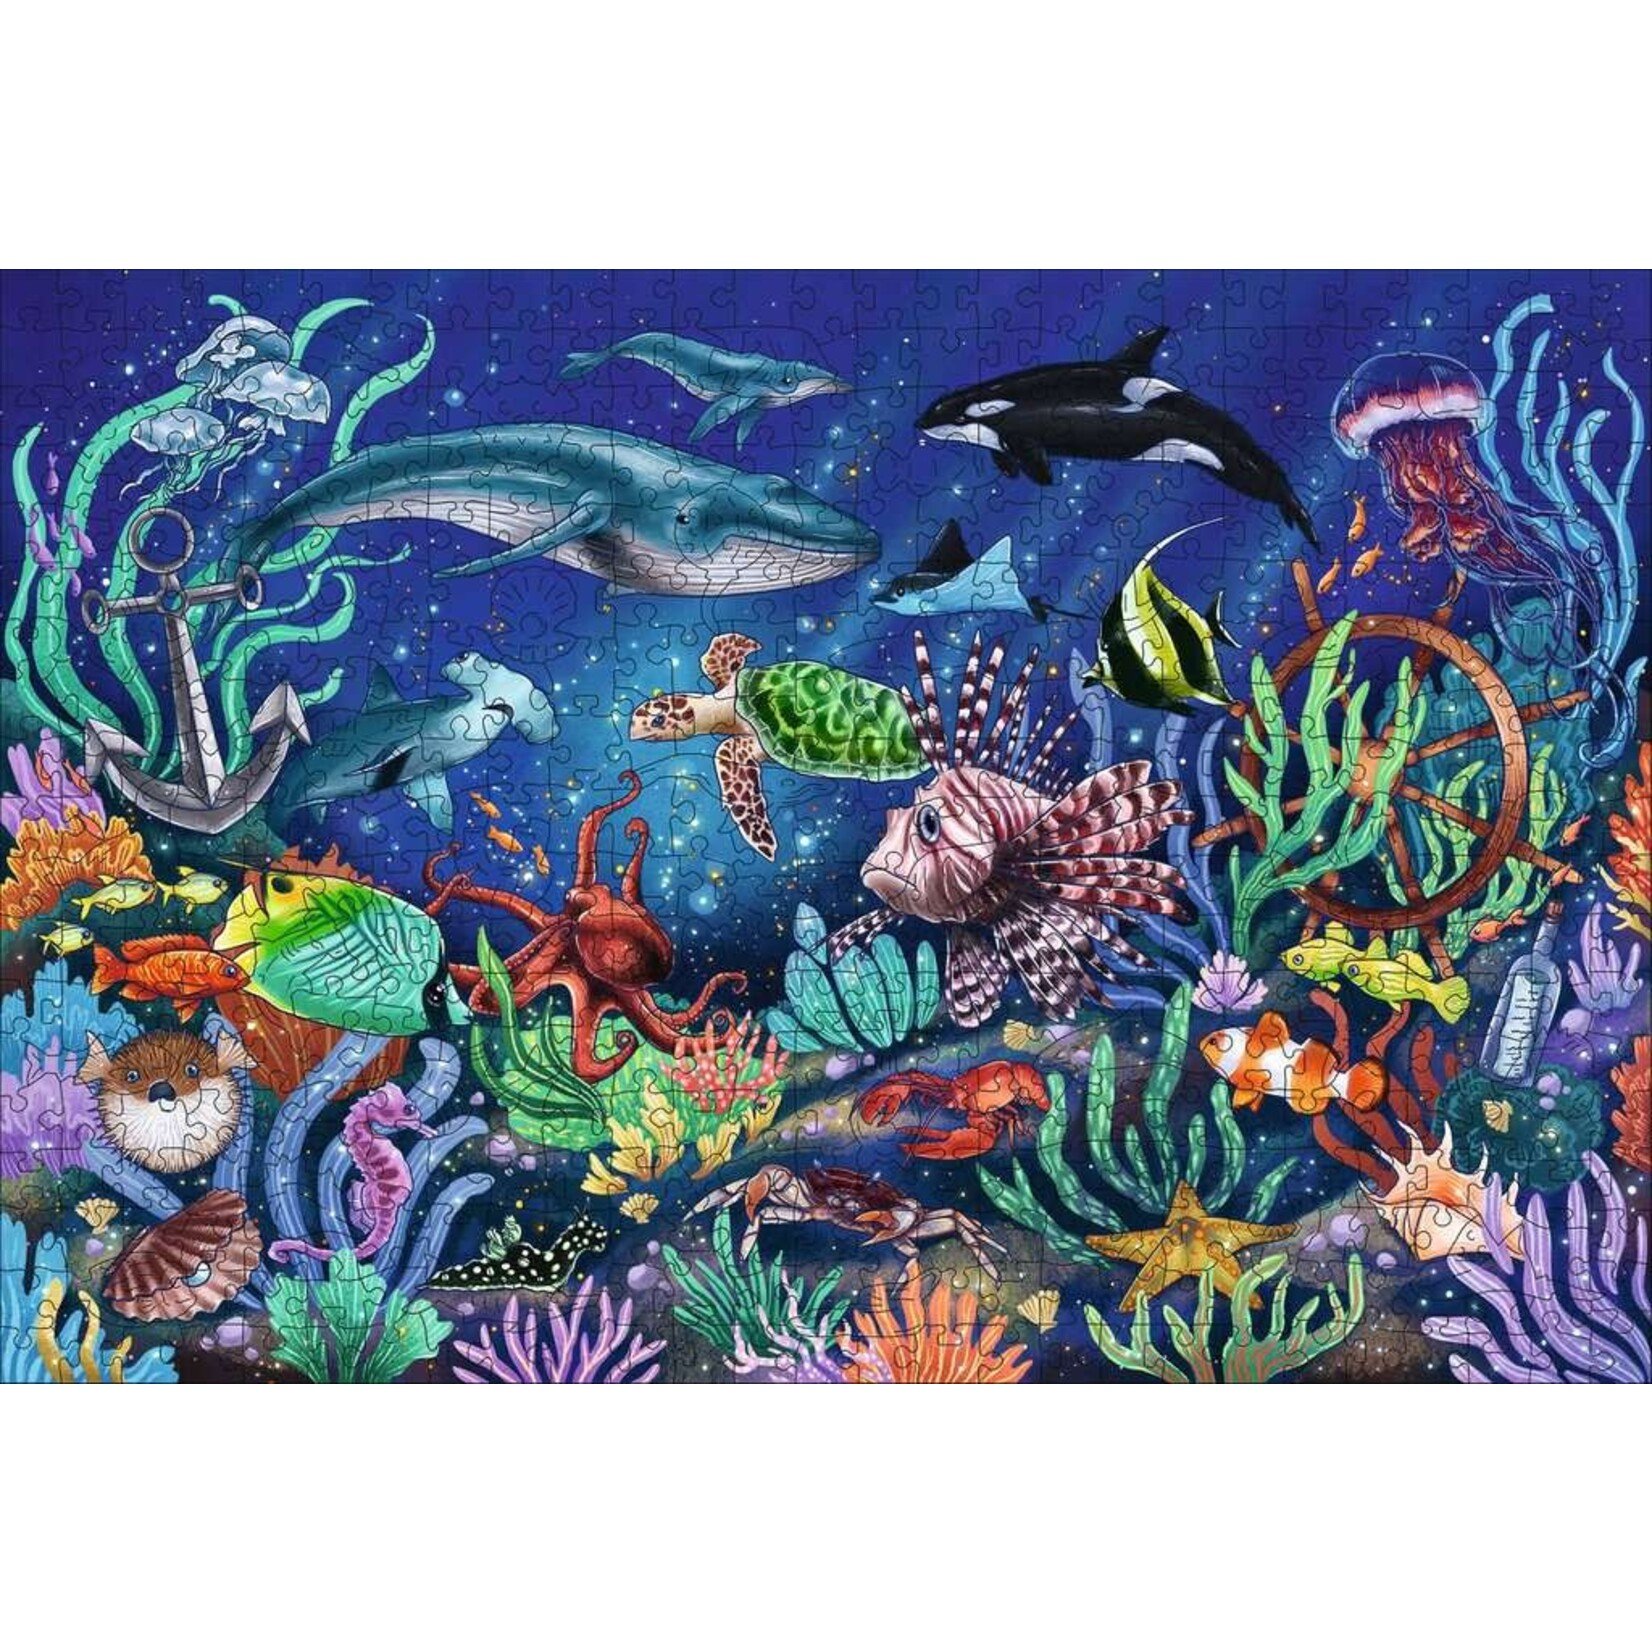 WOOD: Under the Sea 500 Piece Wooden Puzzle